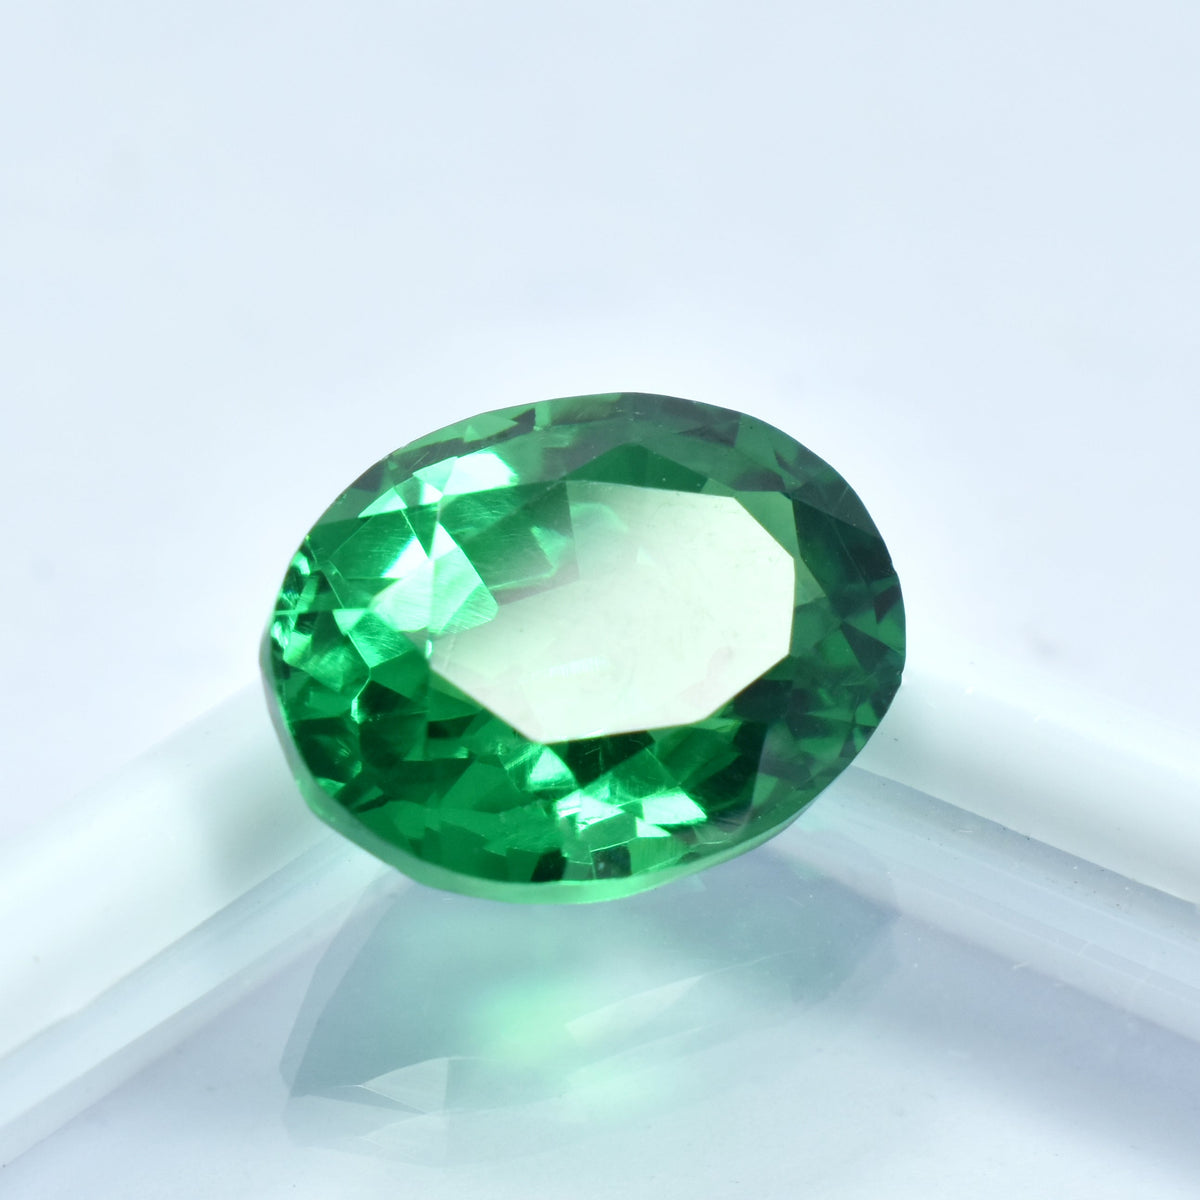 Garnet Jewelry Specially For Bride , 8.99 Carat Green Garnet Oval Shape Natural Certified Loose Gemstone | Gift With Free Delivery | GARNET- Protection & Mentally Fit